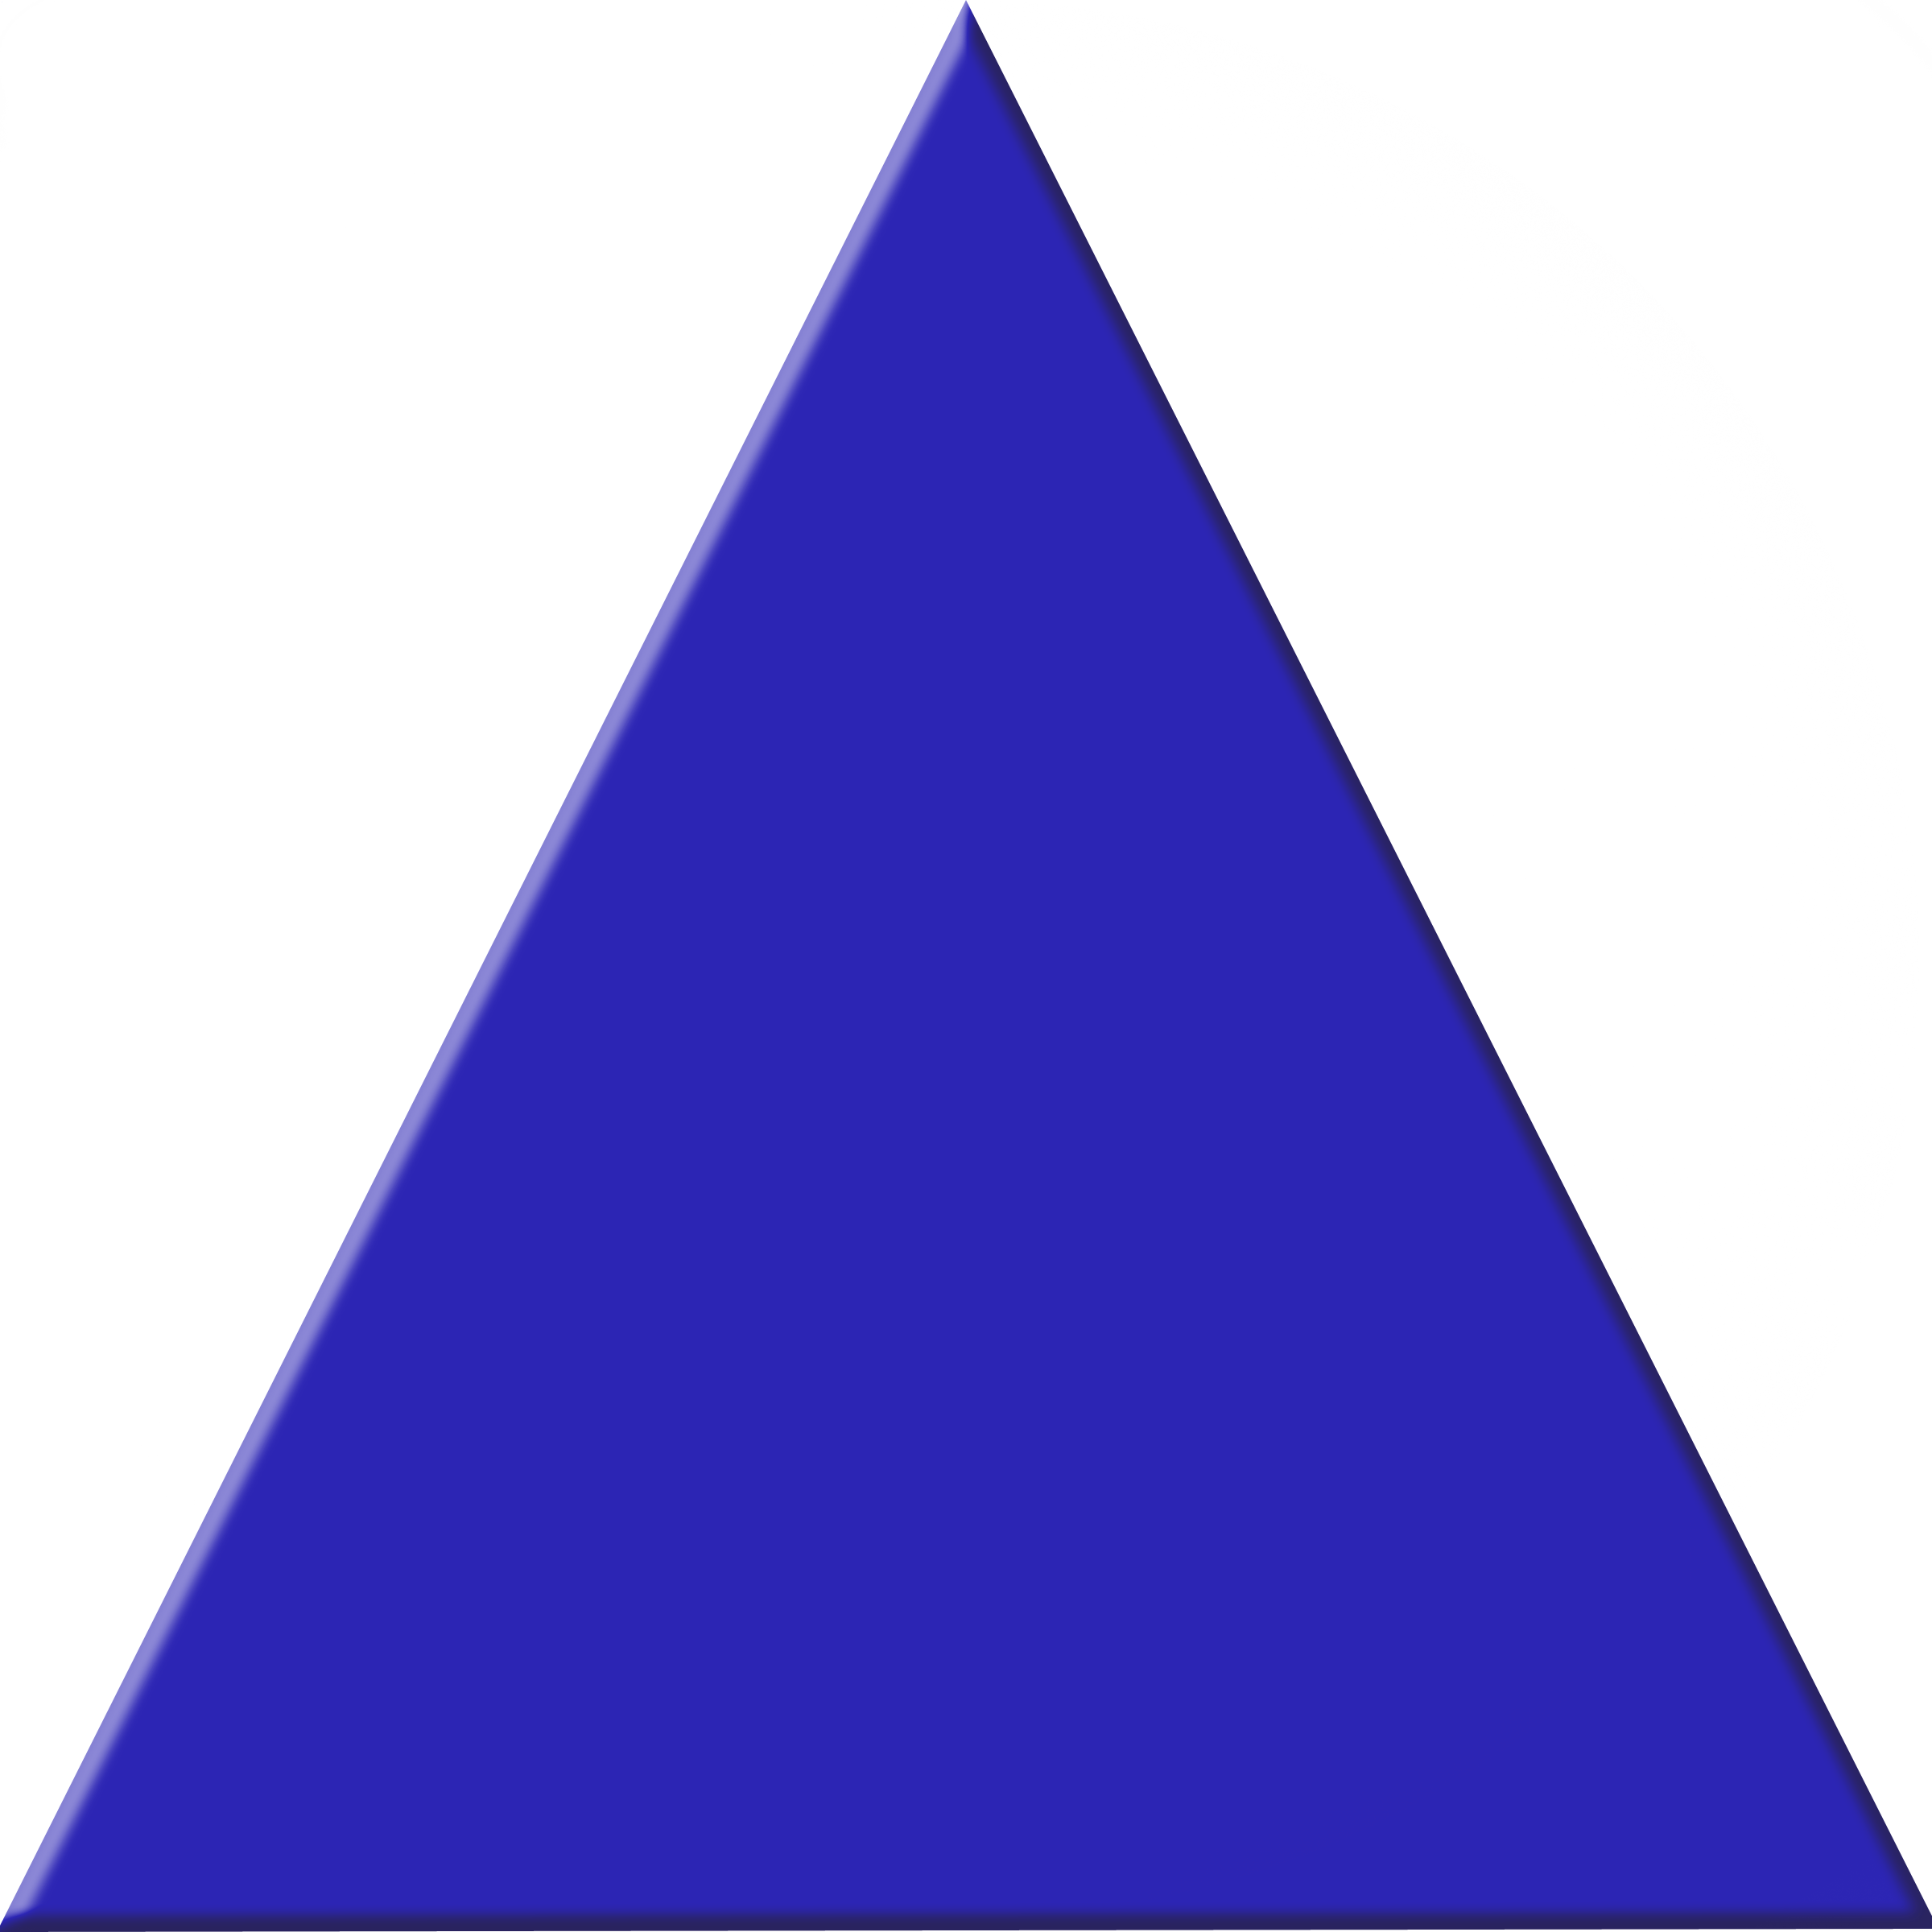 Blue and Red Triangle Logo - Triangle Transparent PNG Pictures - Free Icons and PNG Backgrounds